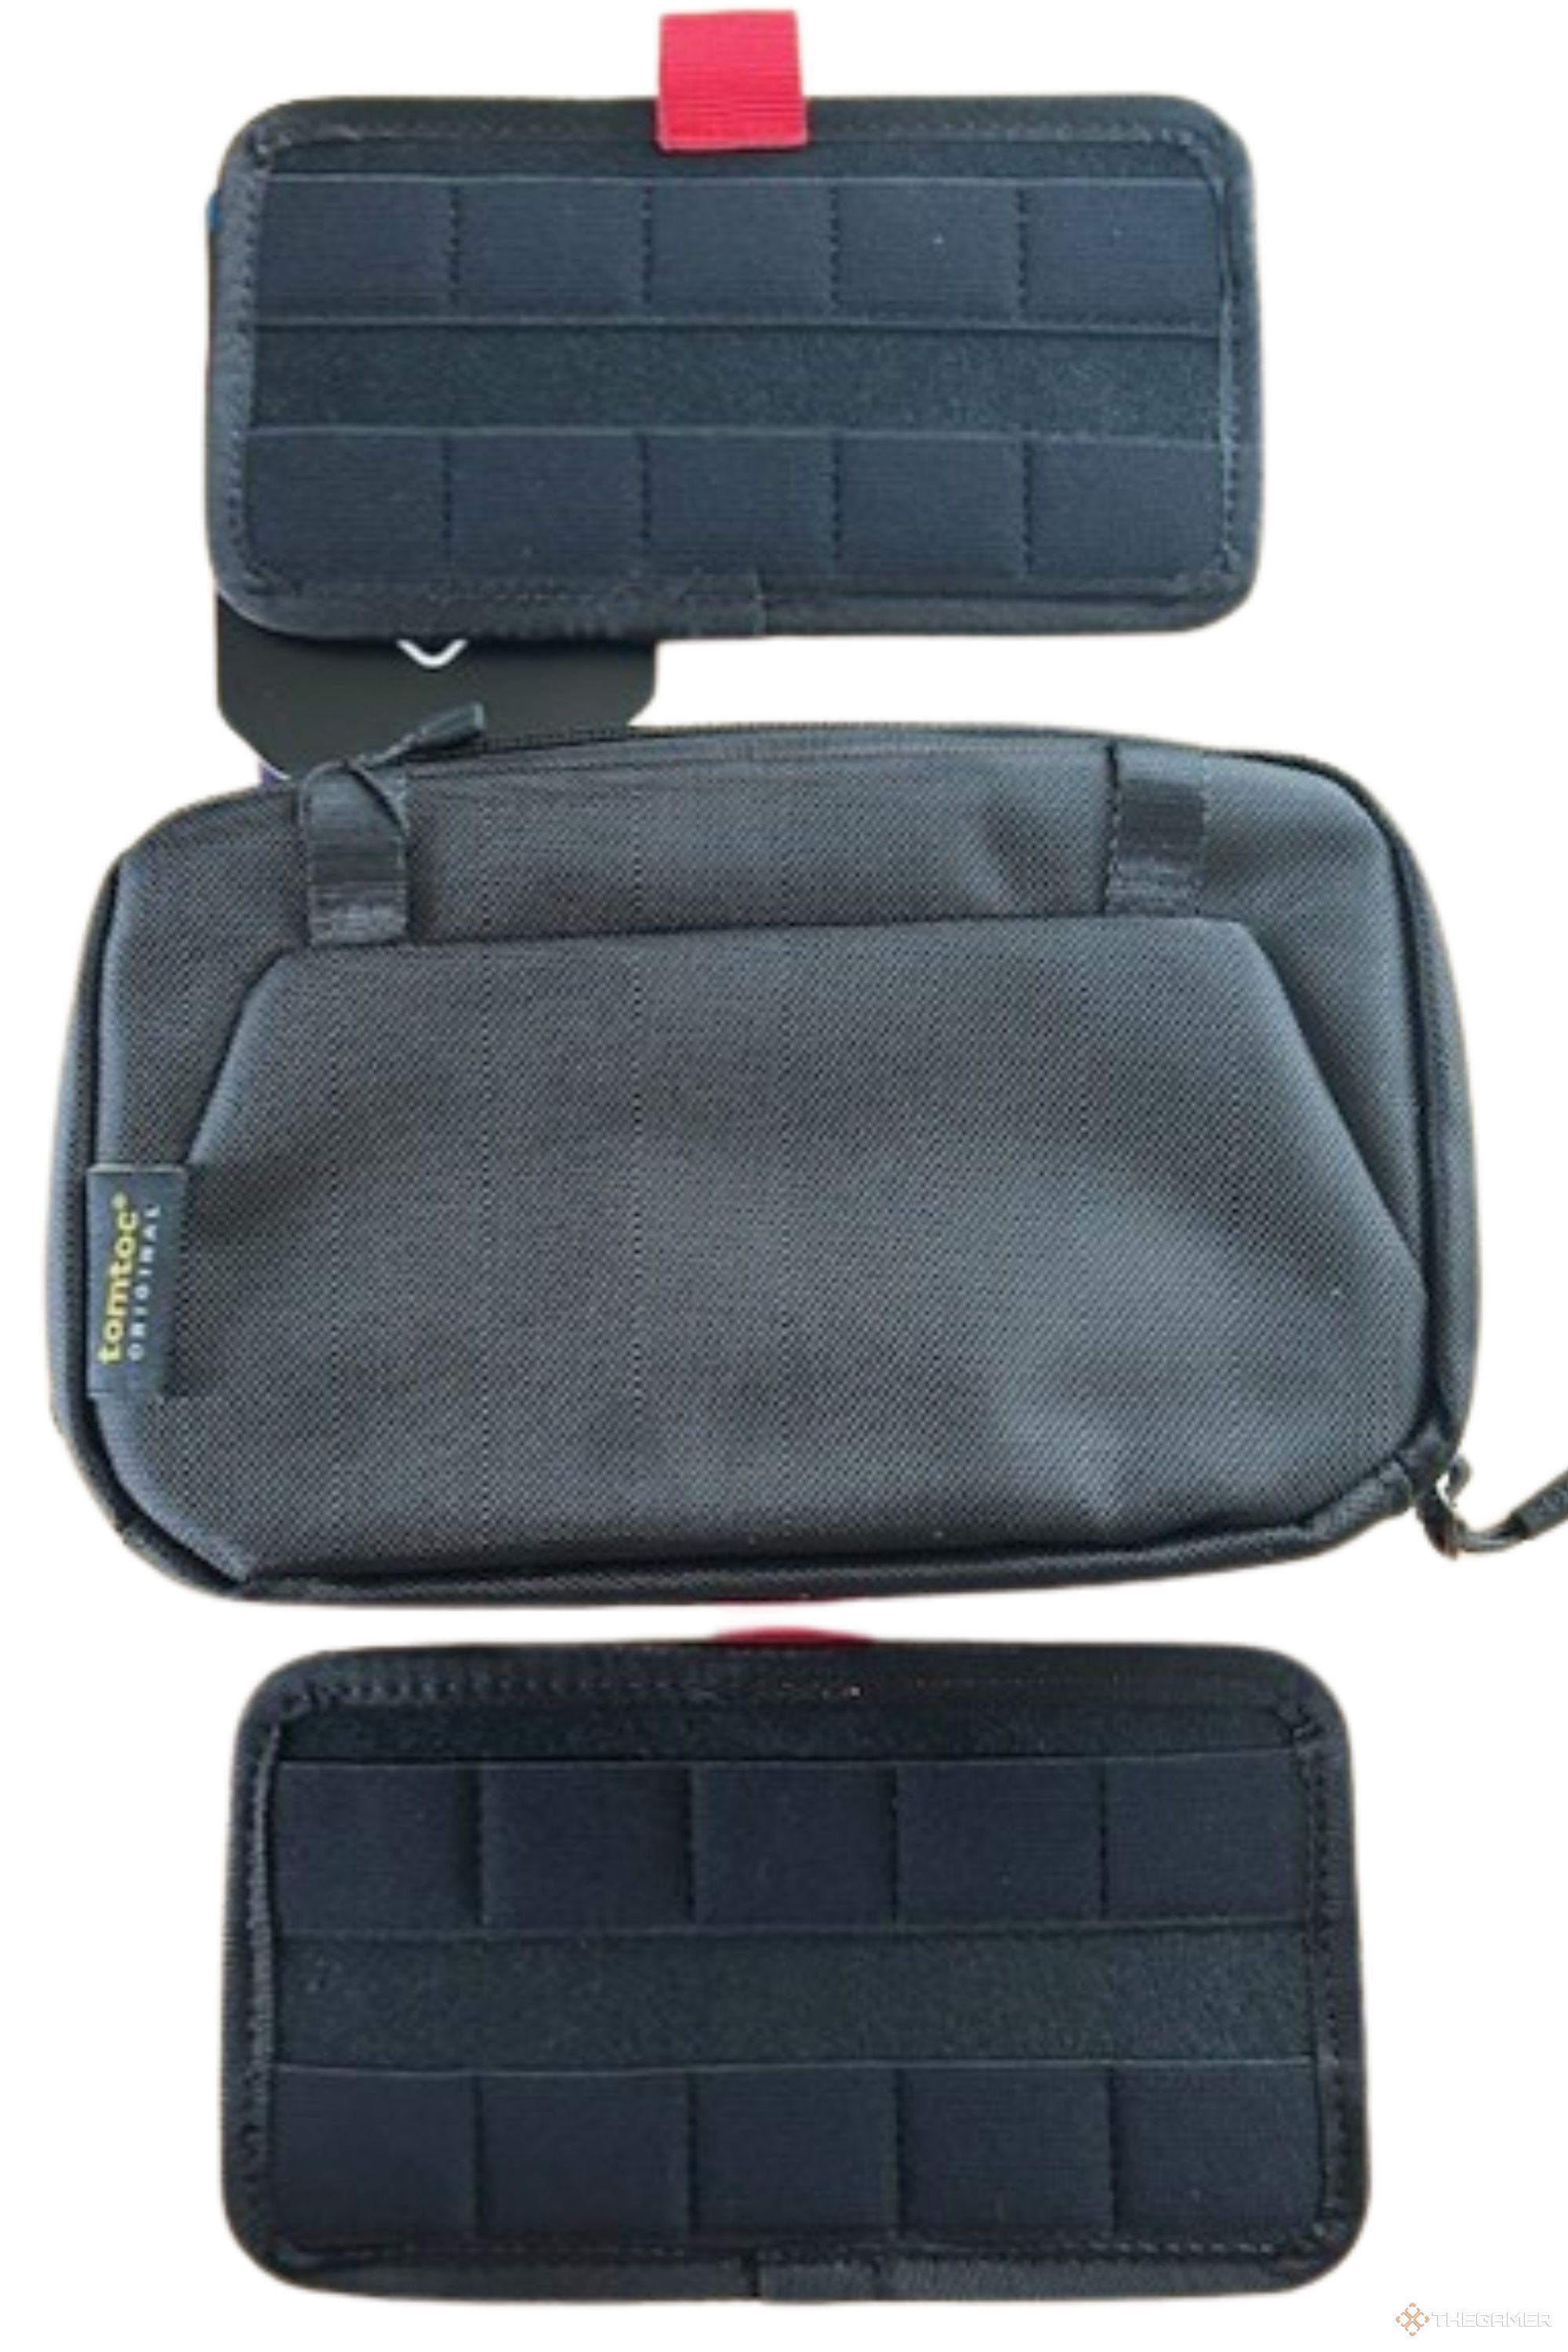 tomtoc game card bag with removable sections